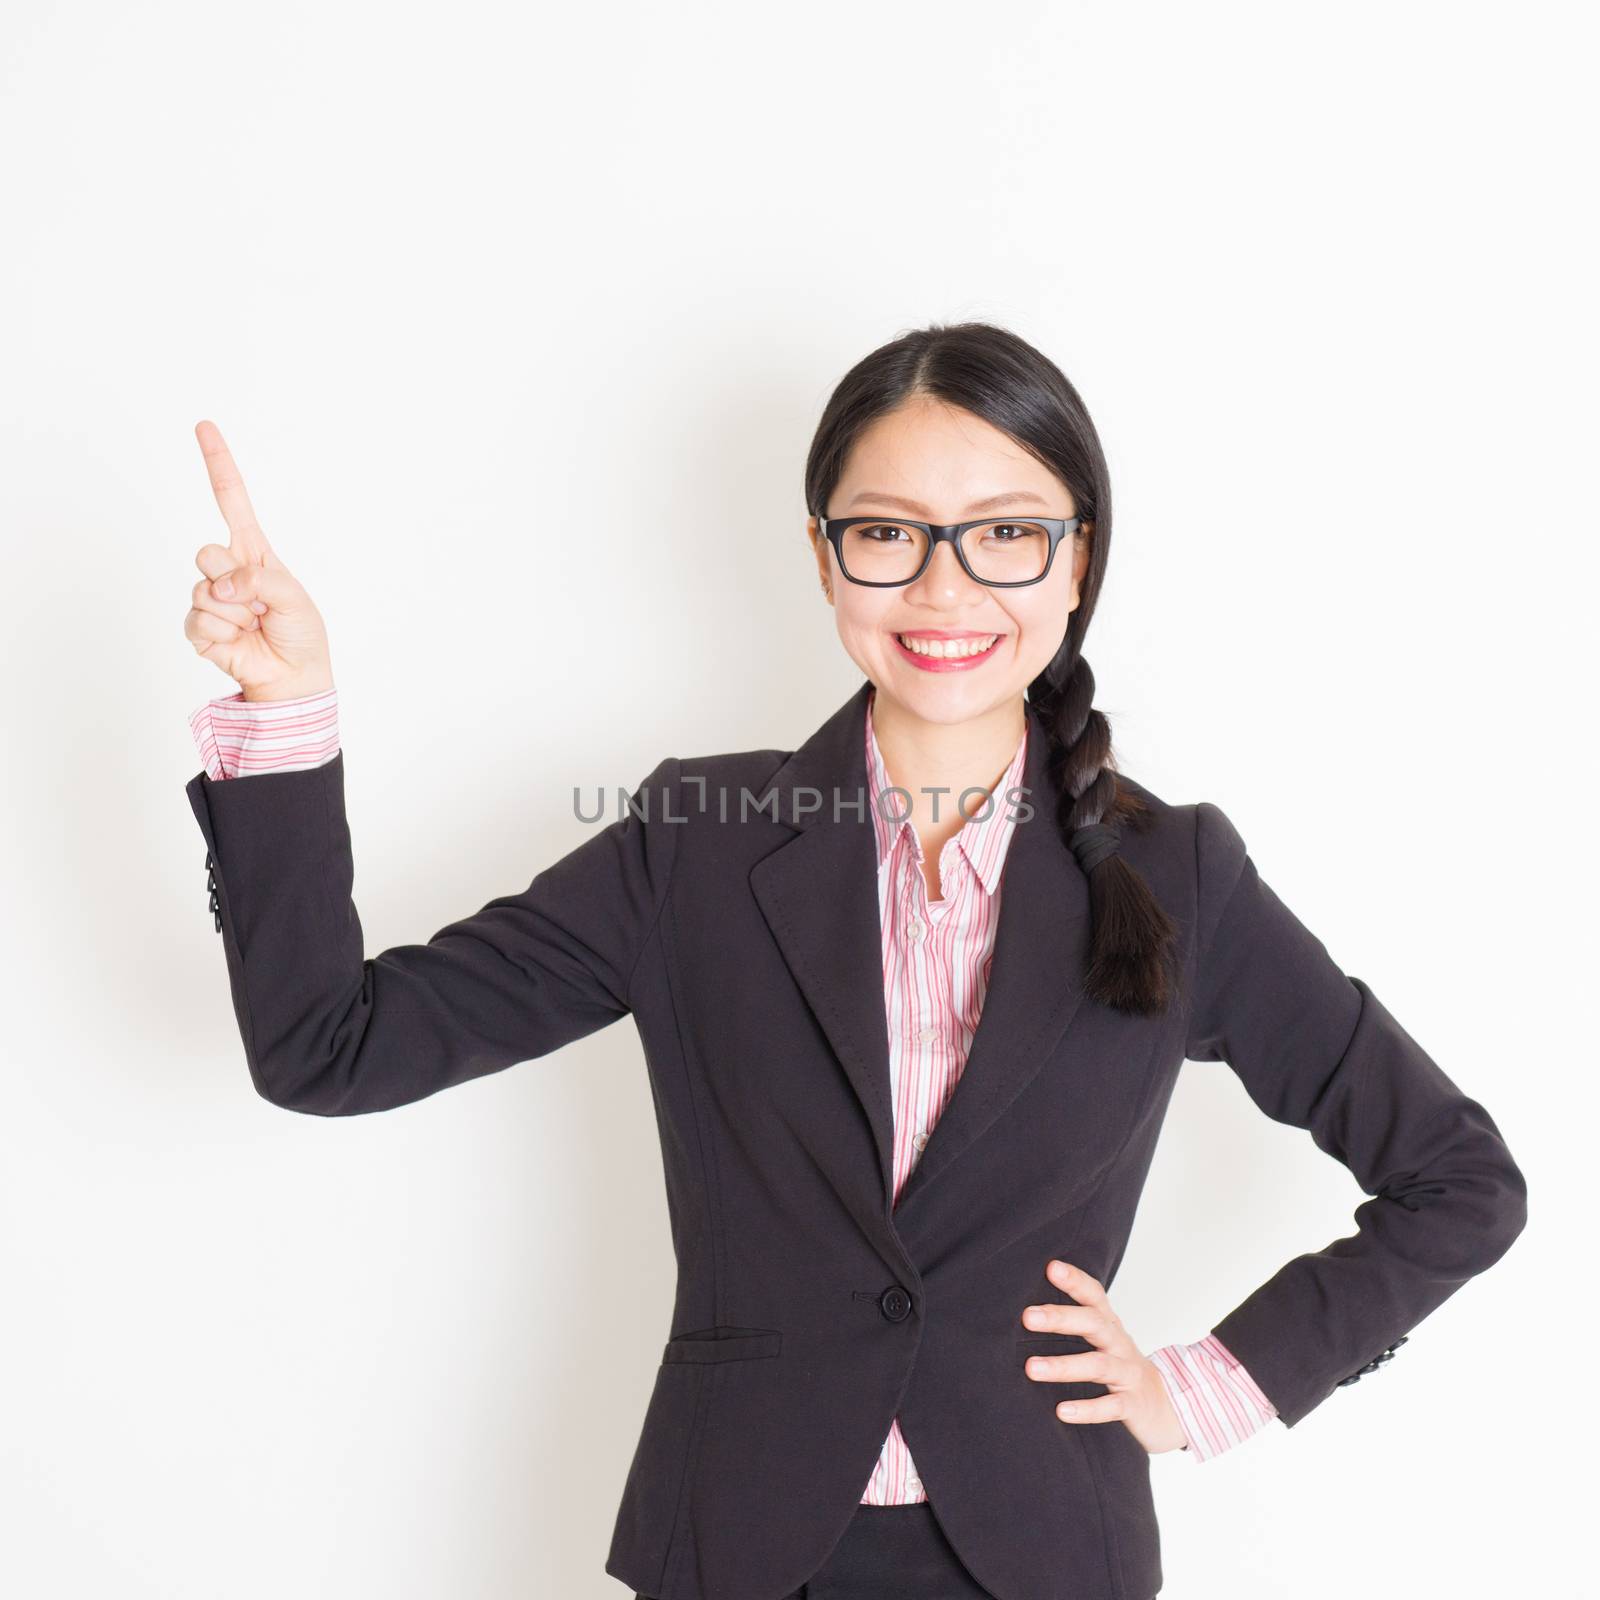 Portrait of Asian businesswoman in formalwear smiling and finger pointing on something, standing on plain background.